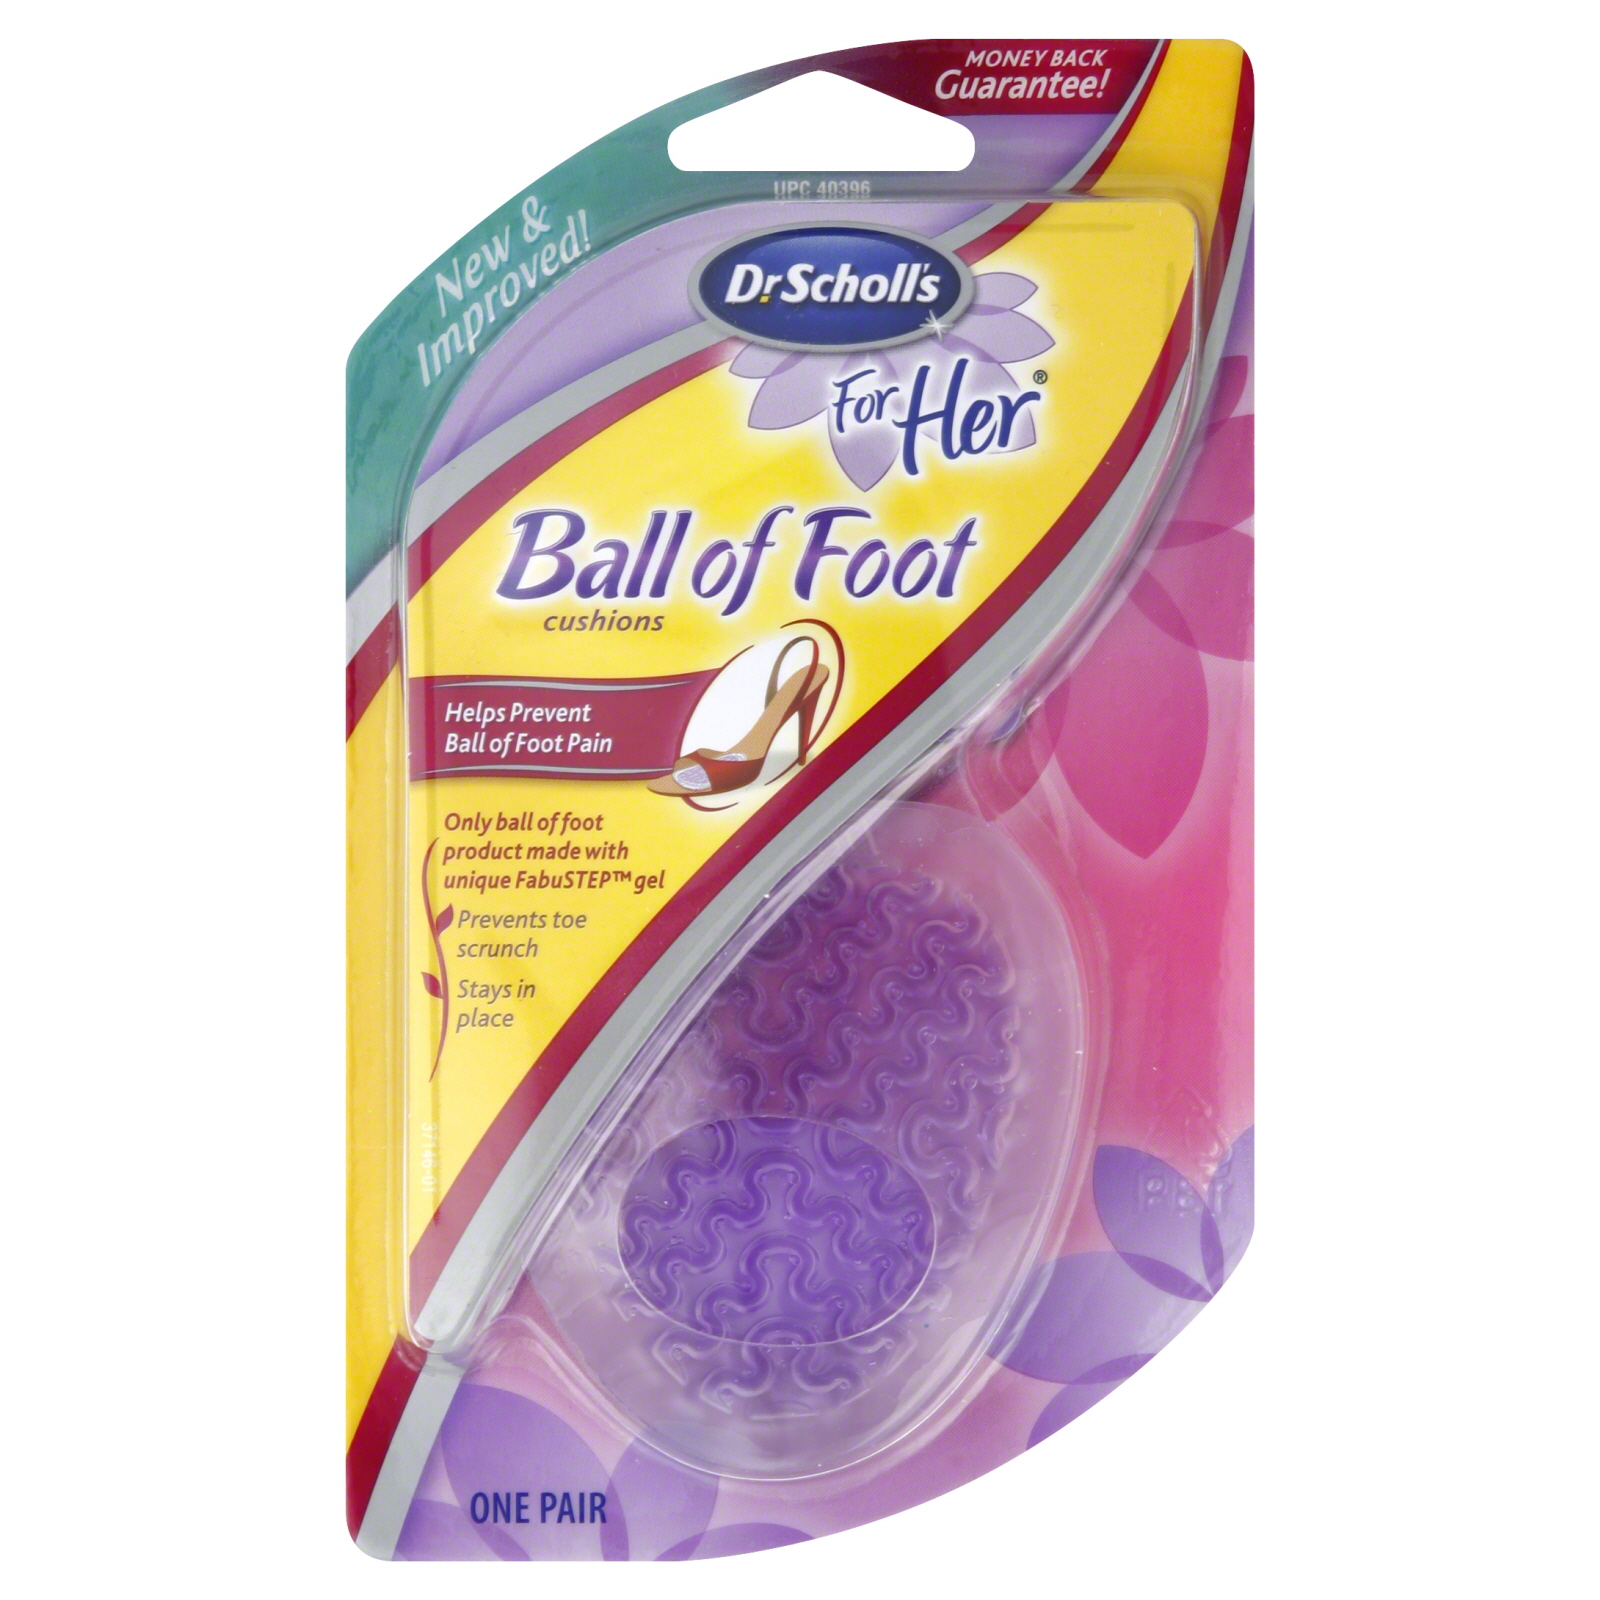 Dr. Scholl's For Her Ball of Foot Cushions, 1 pair